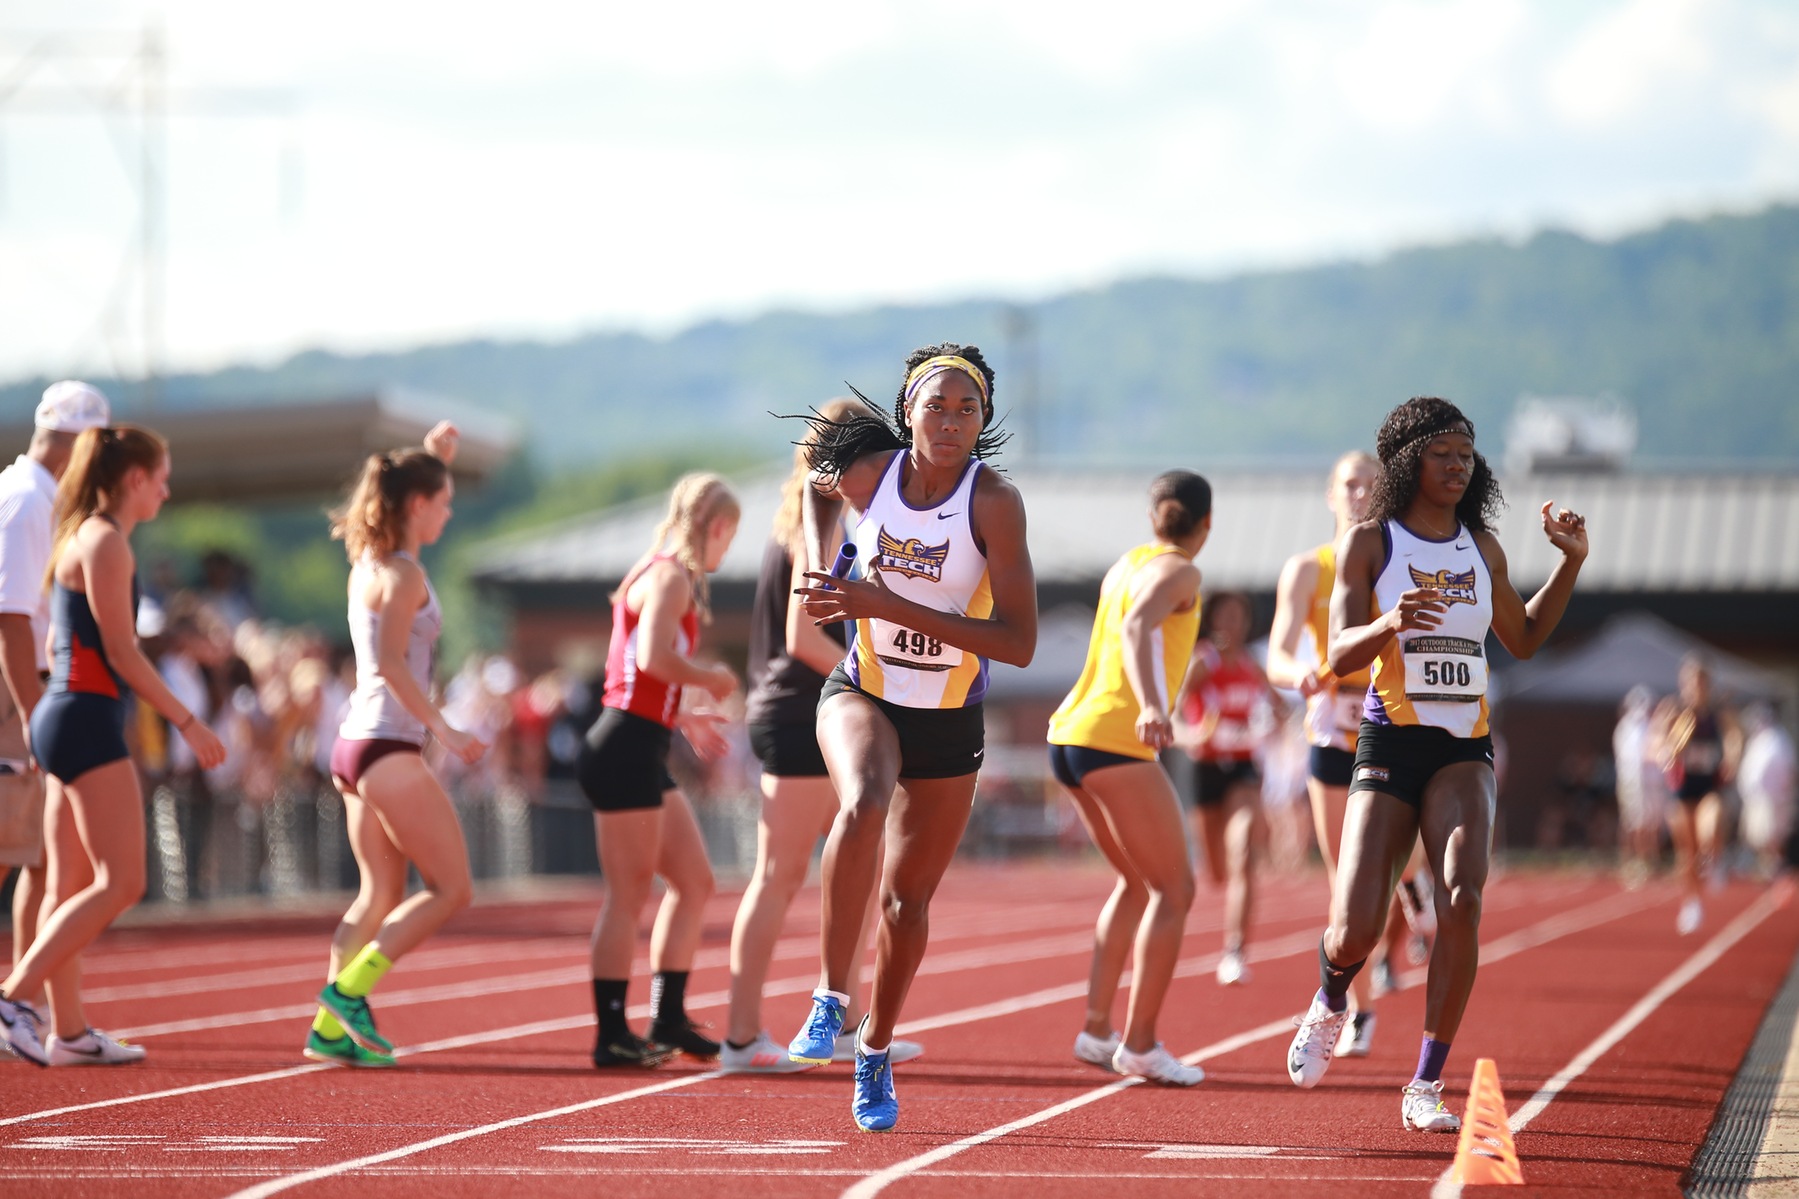 Tennessee Tech women's track and field looking to student body for 2018-19 roster additions